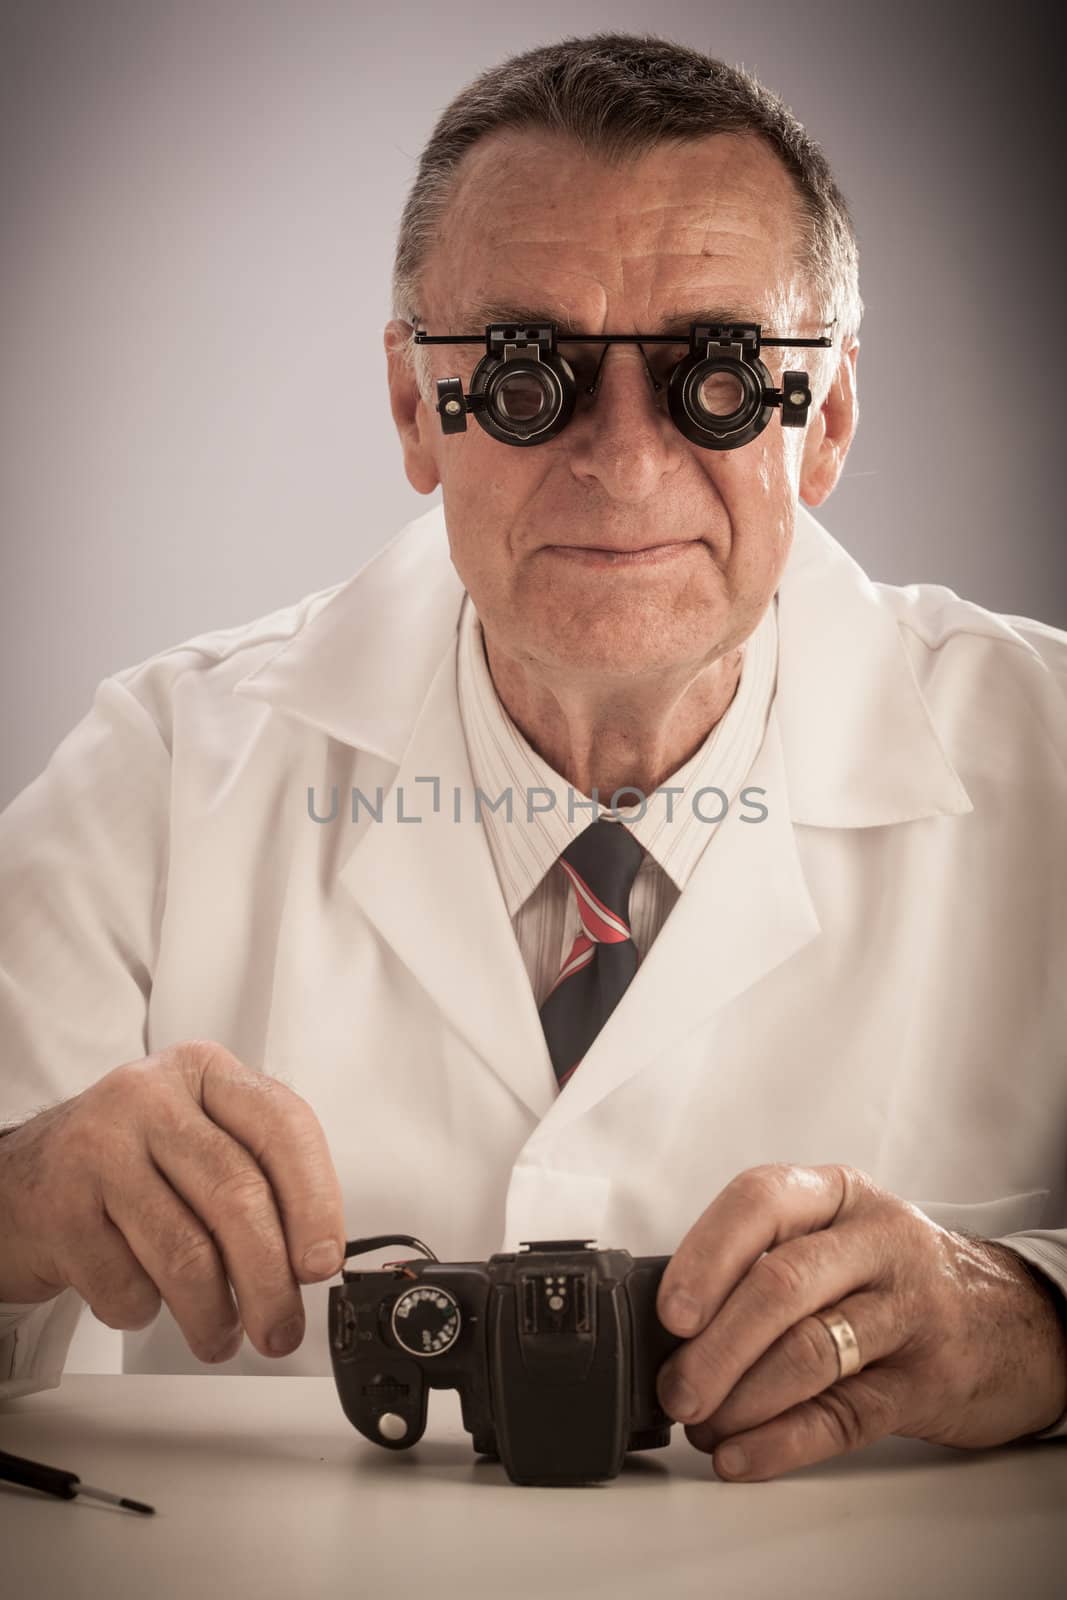 An older male wearing a white lab coat and repairing electronic equipments, like a technician or a repair man.